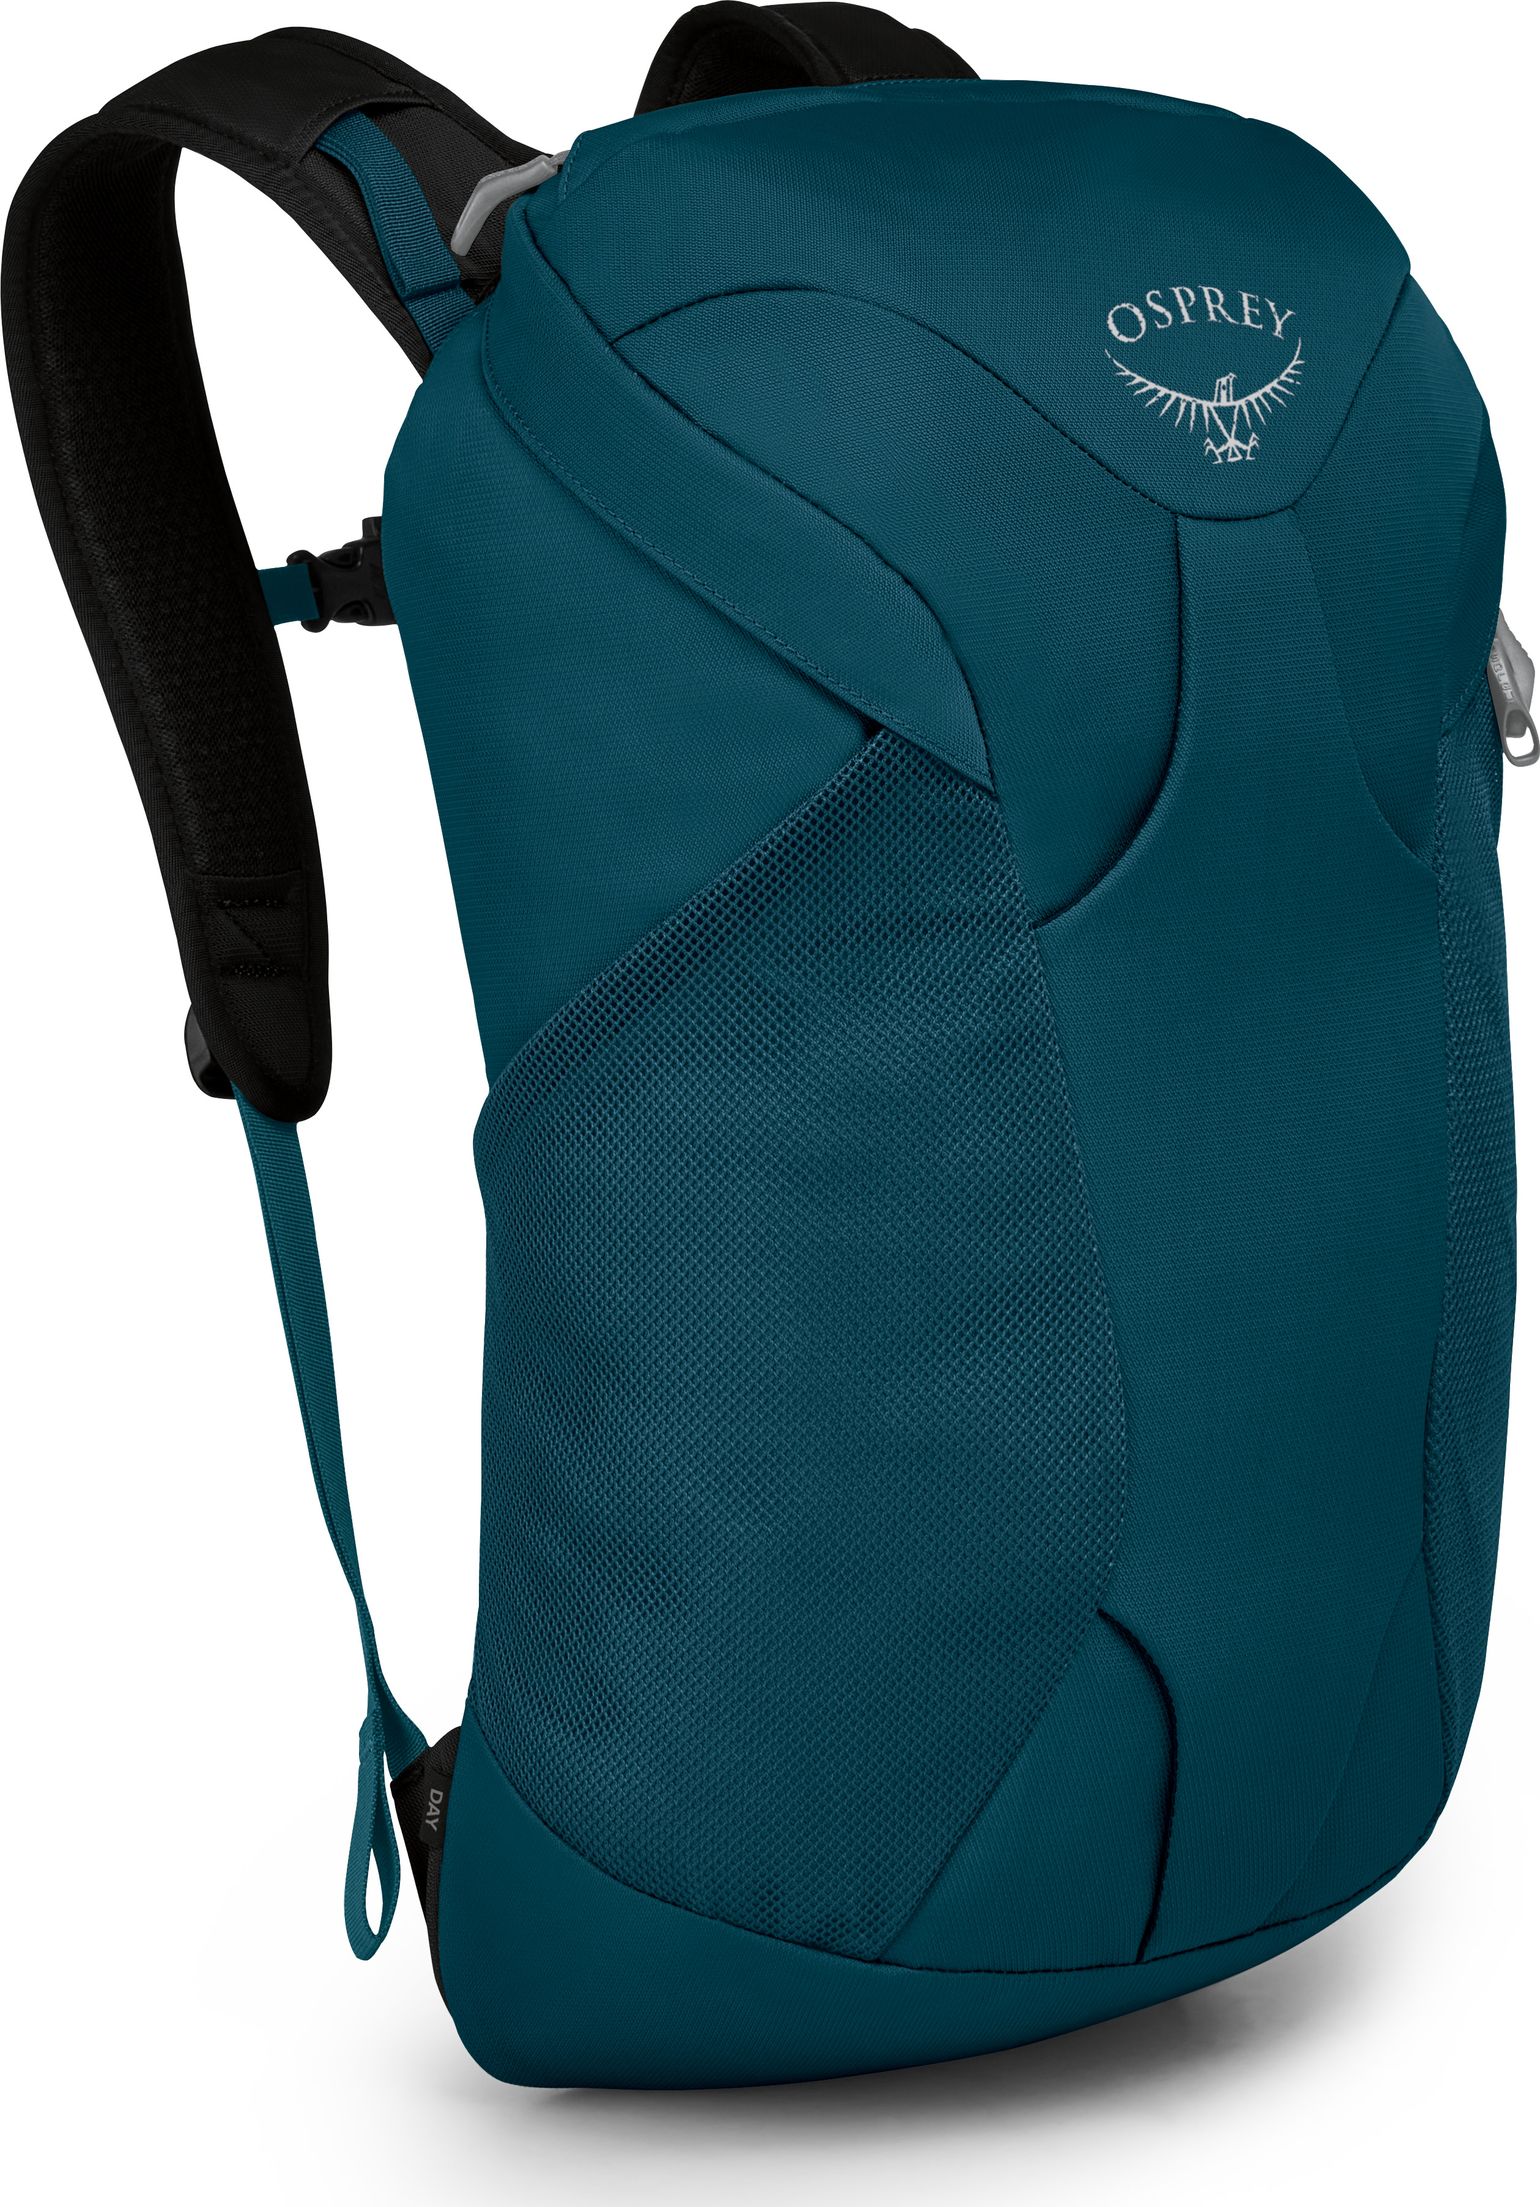 Farpoint Fairview Travel Daypack Night Jungle Blue